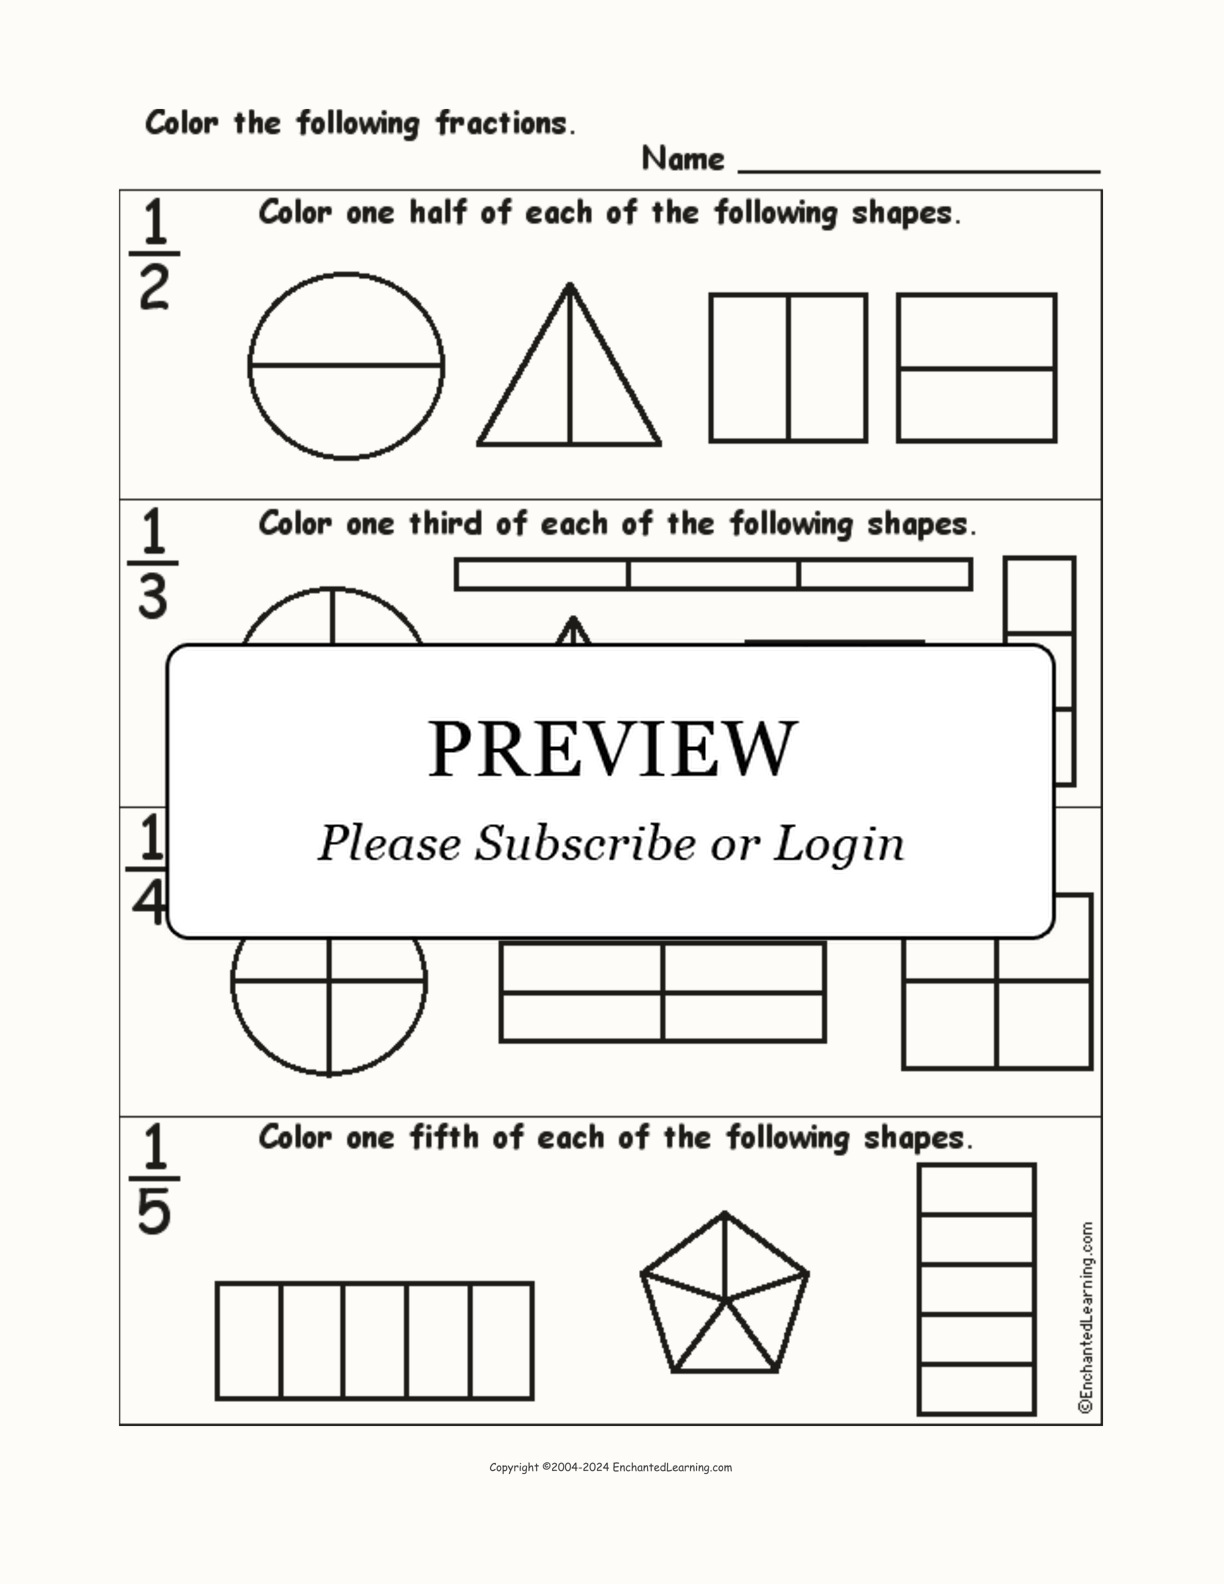 Color the Fractions interactive worksheet page 1